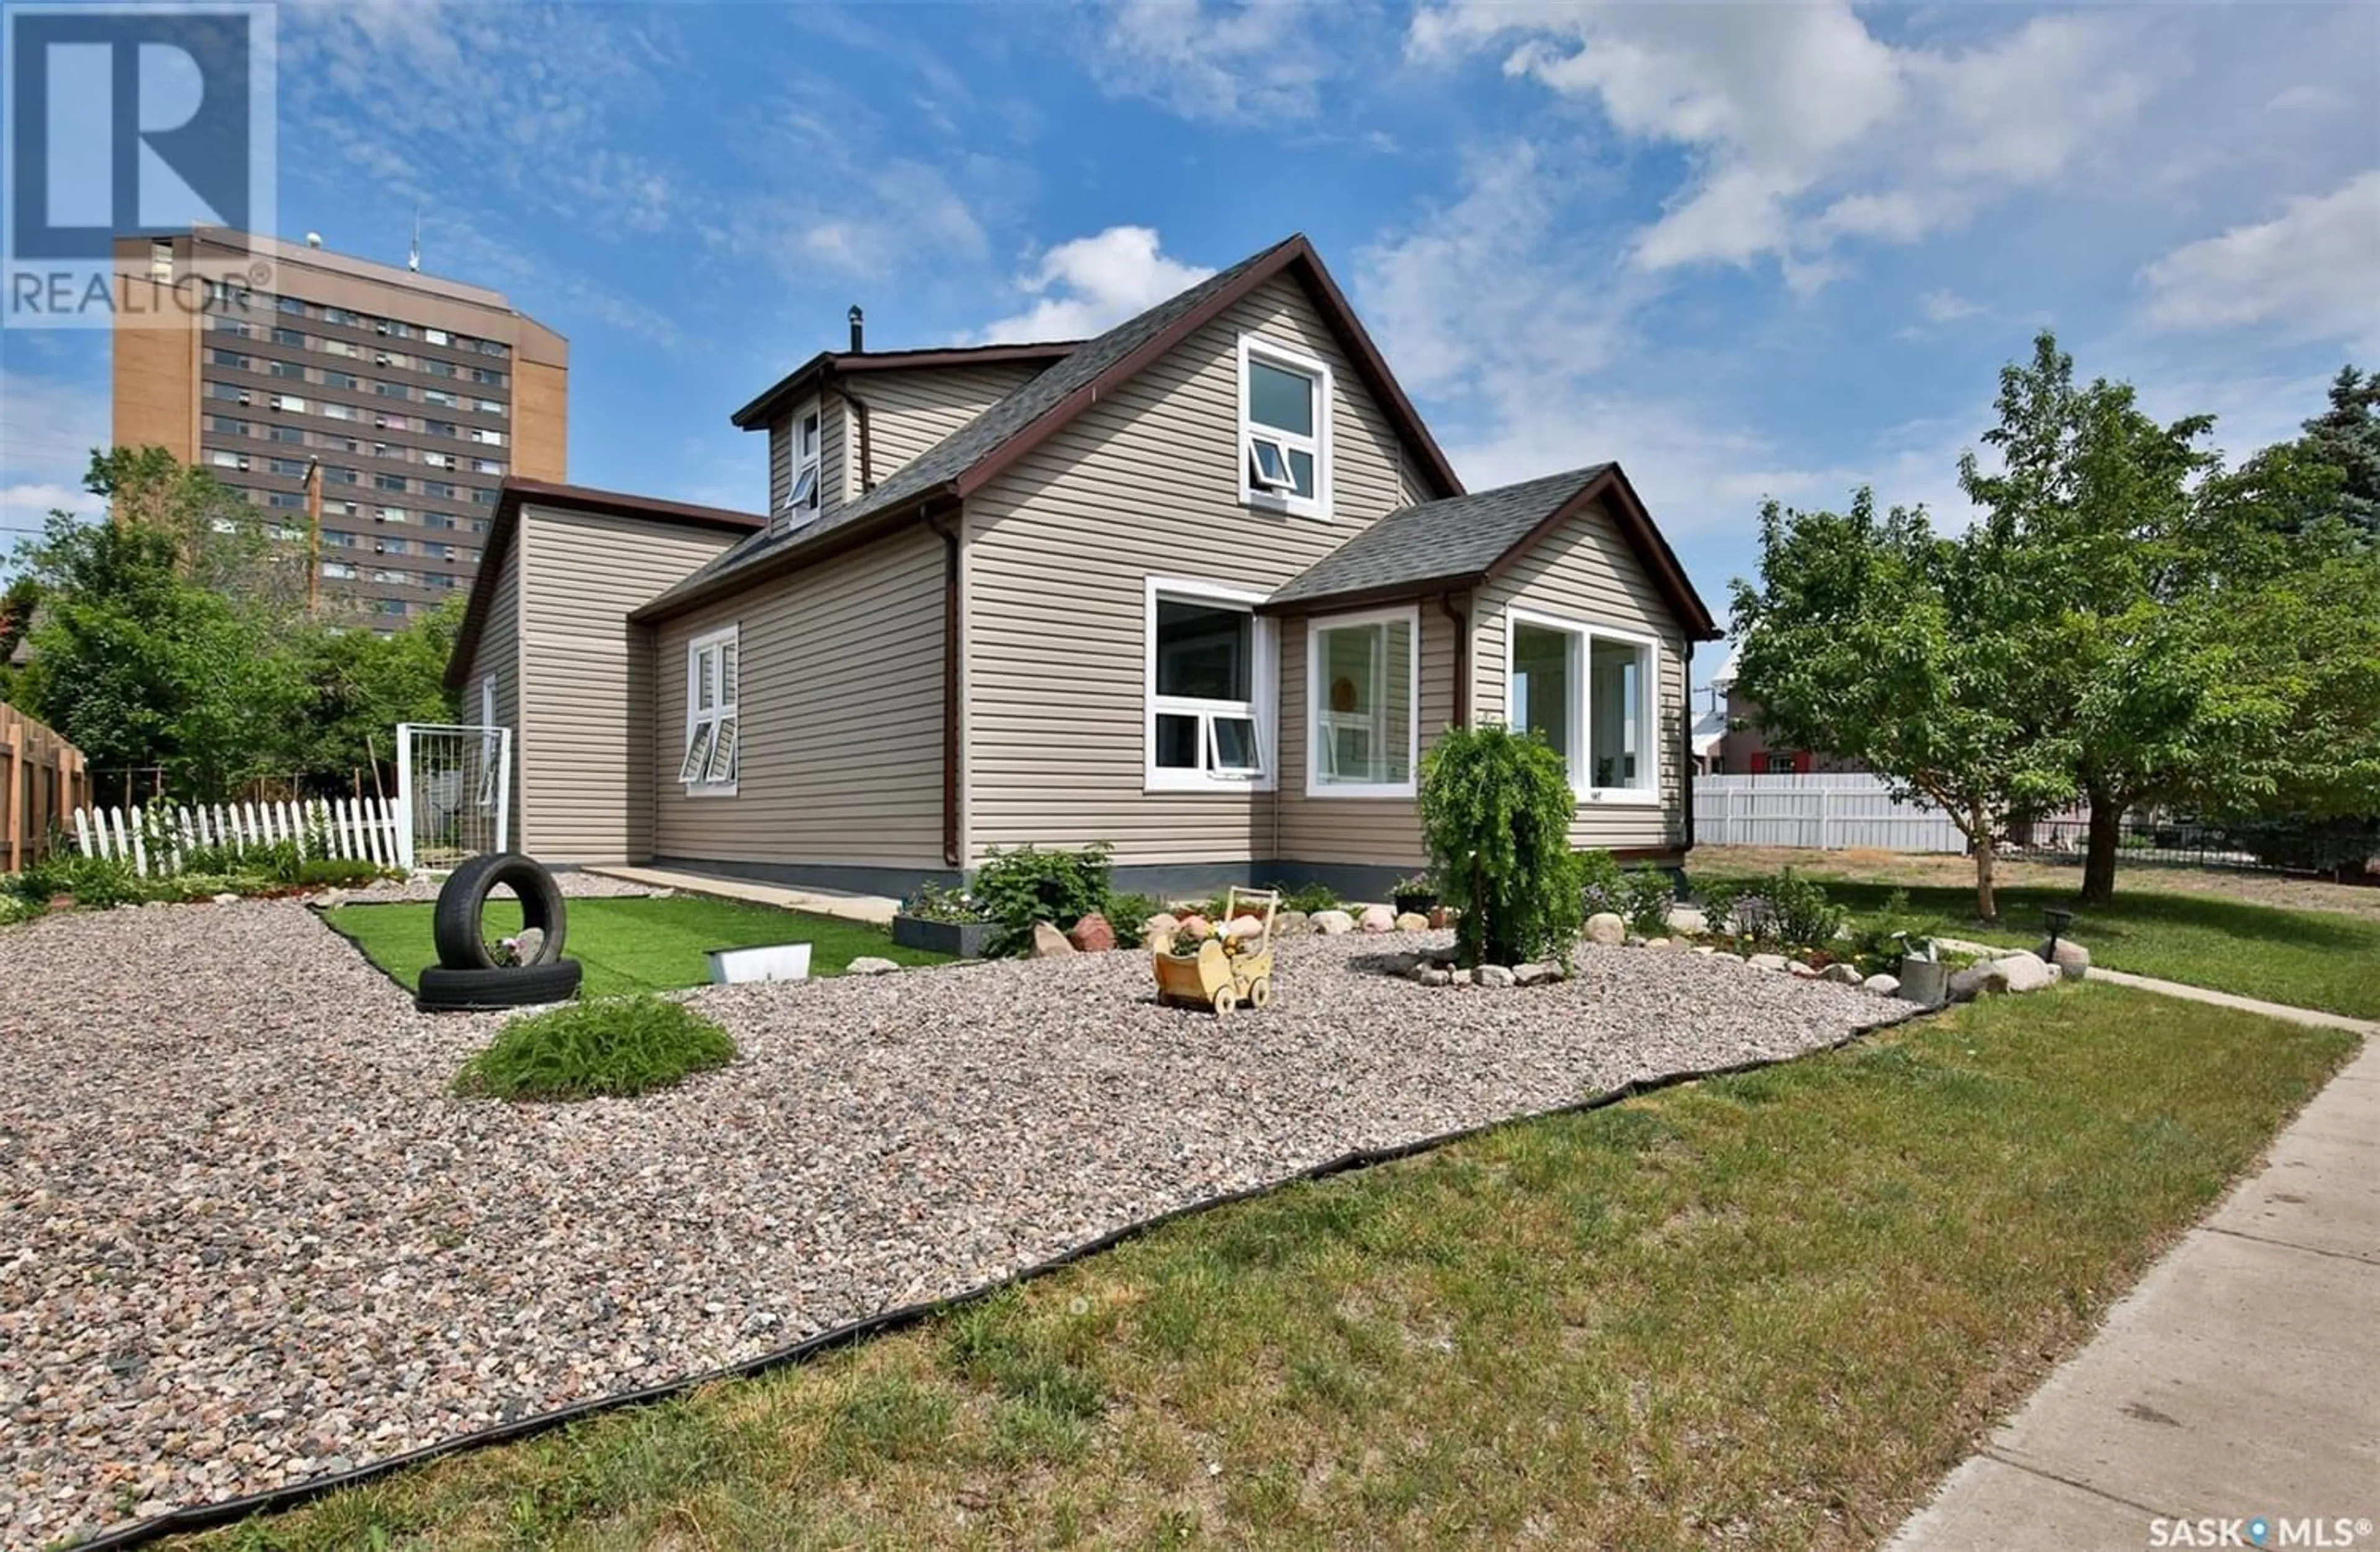 Home with vinyl exterior material for 224 River STREET E, Moose Jaw Saskatchewan S6H0B6